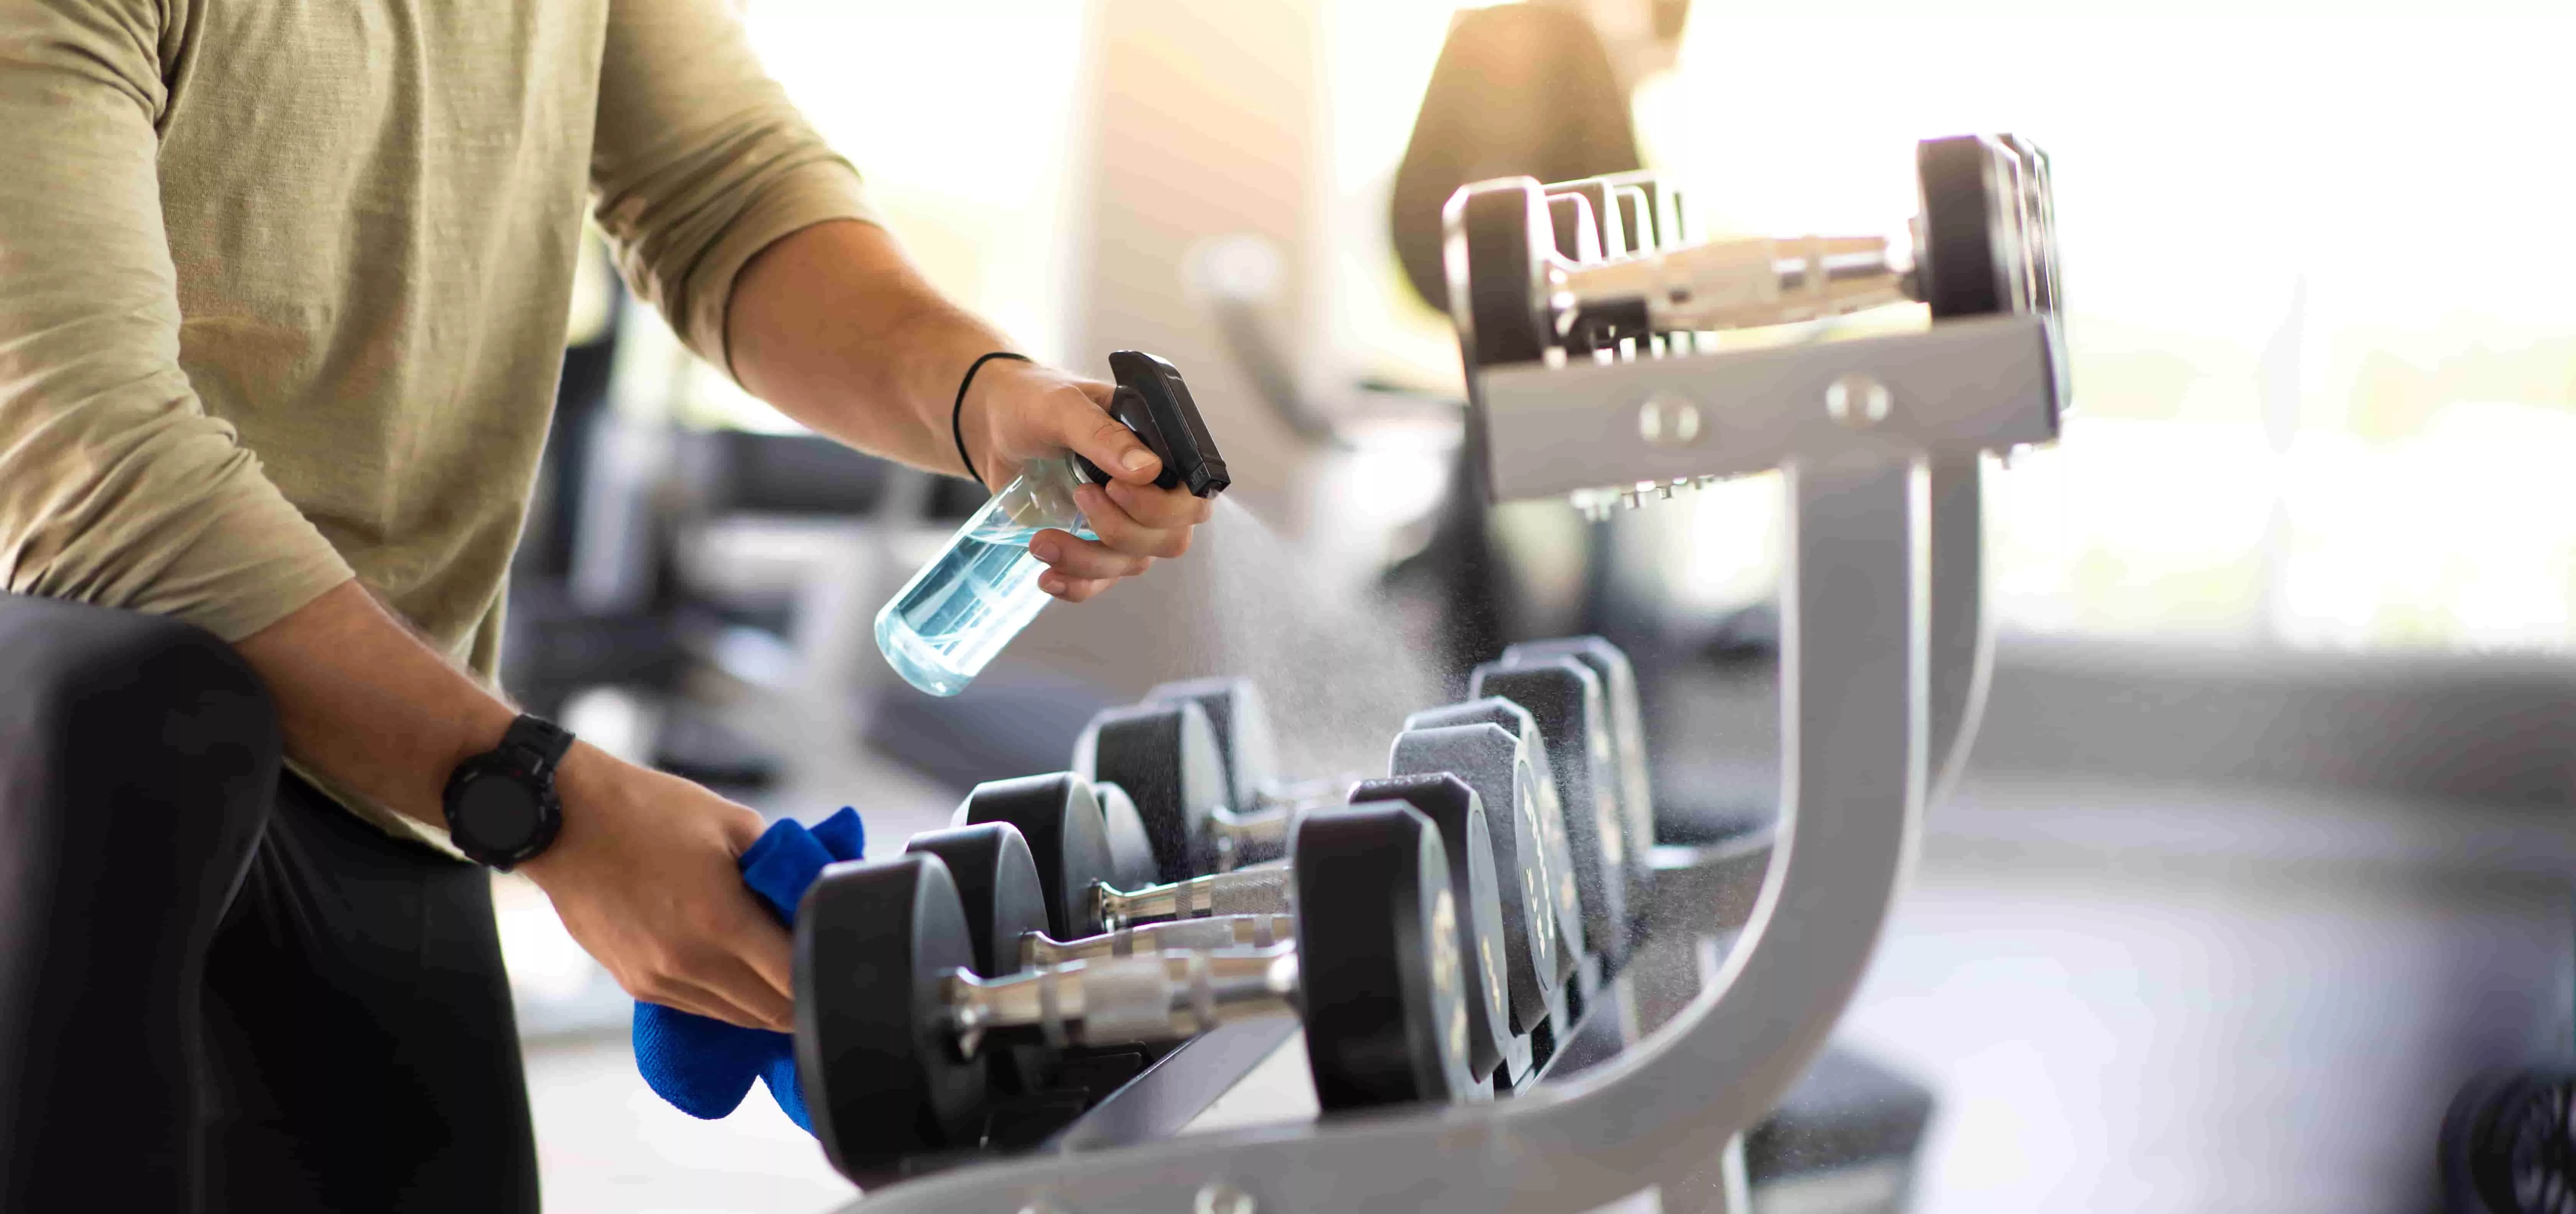 STAY FIT, STAY HEALTHY: CLEANING TIPS FOR COMMUNITY GYMS